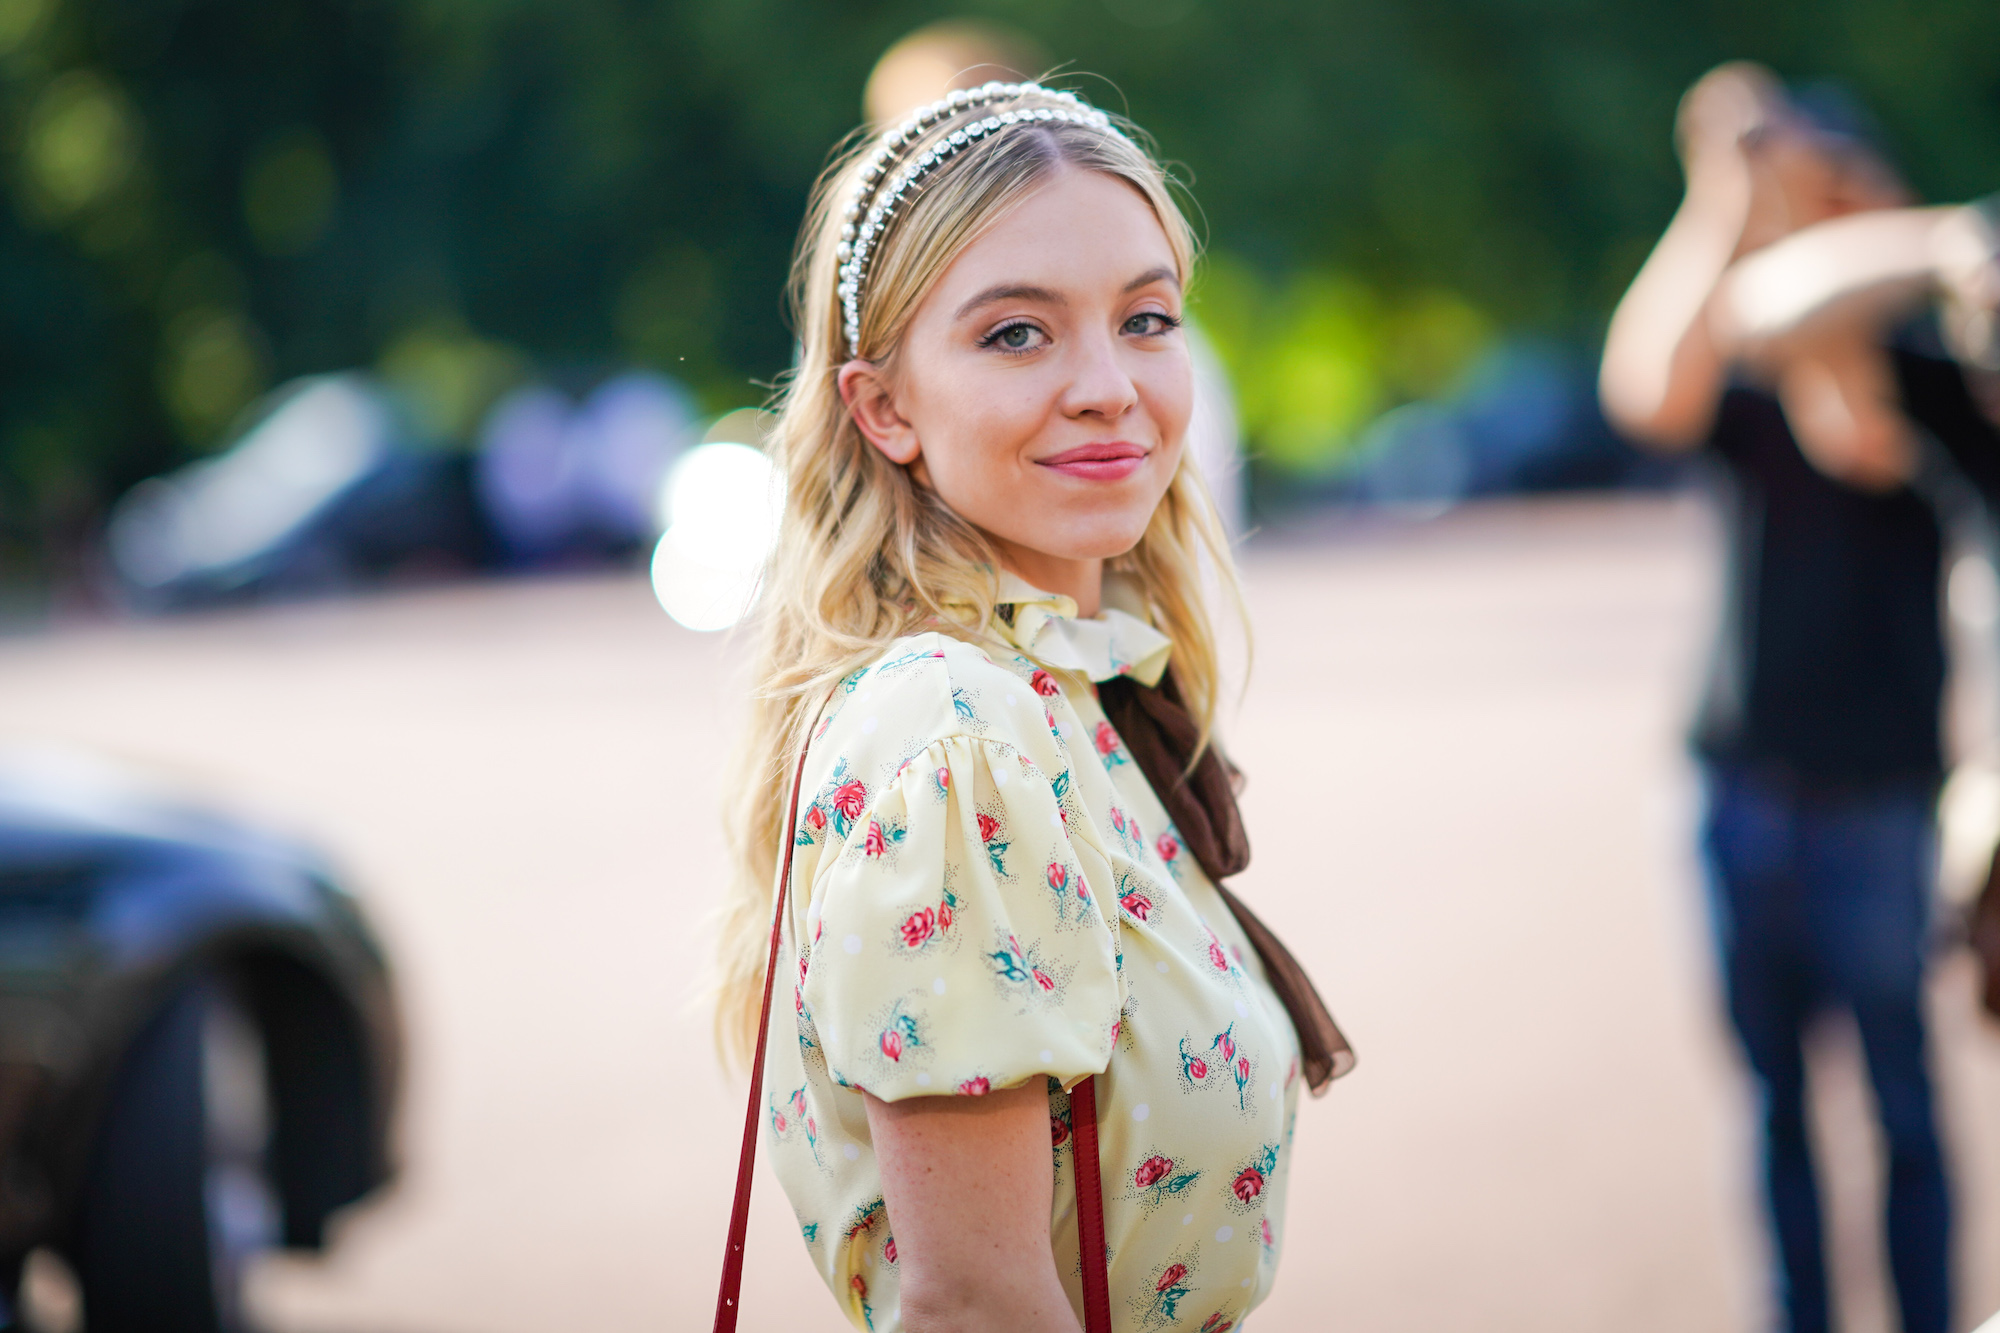 Sydney Sweeney smiling in front of a blurred background